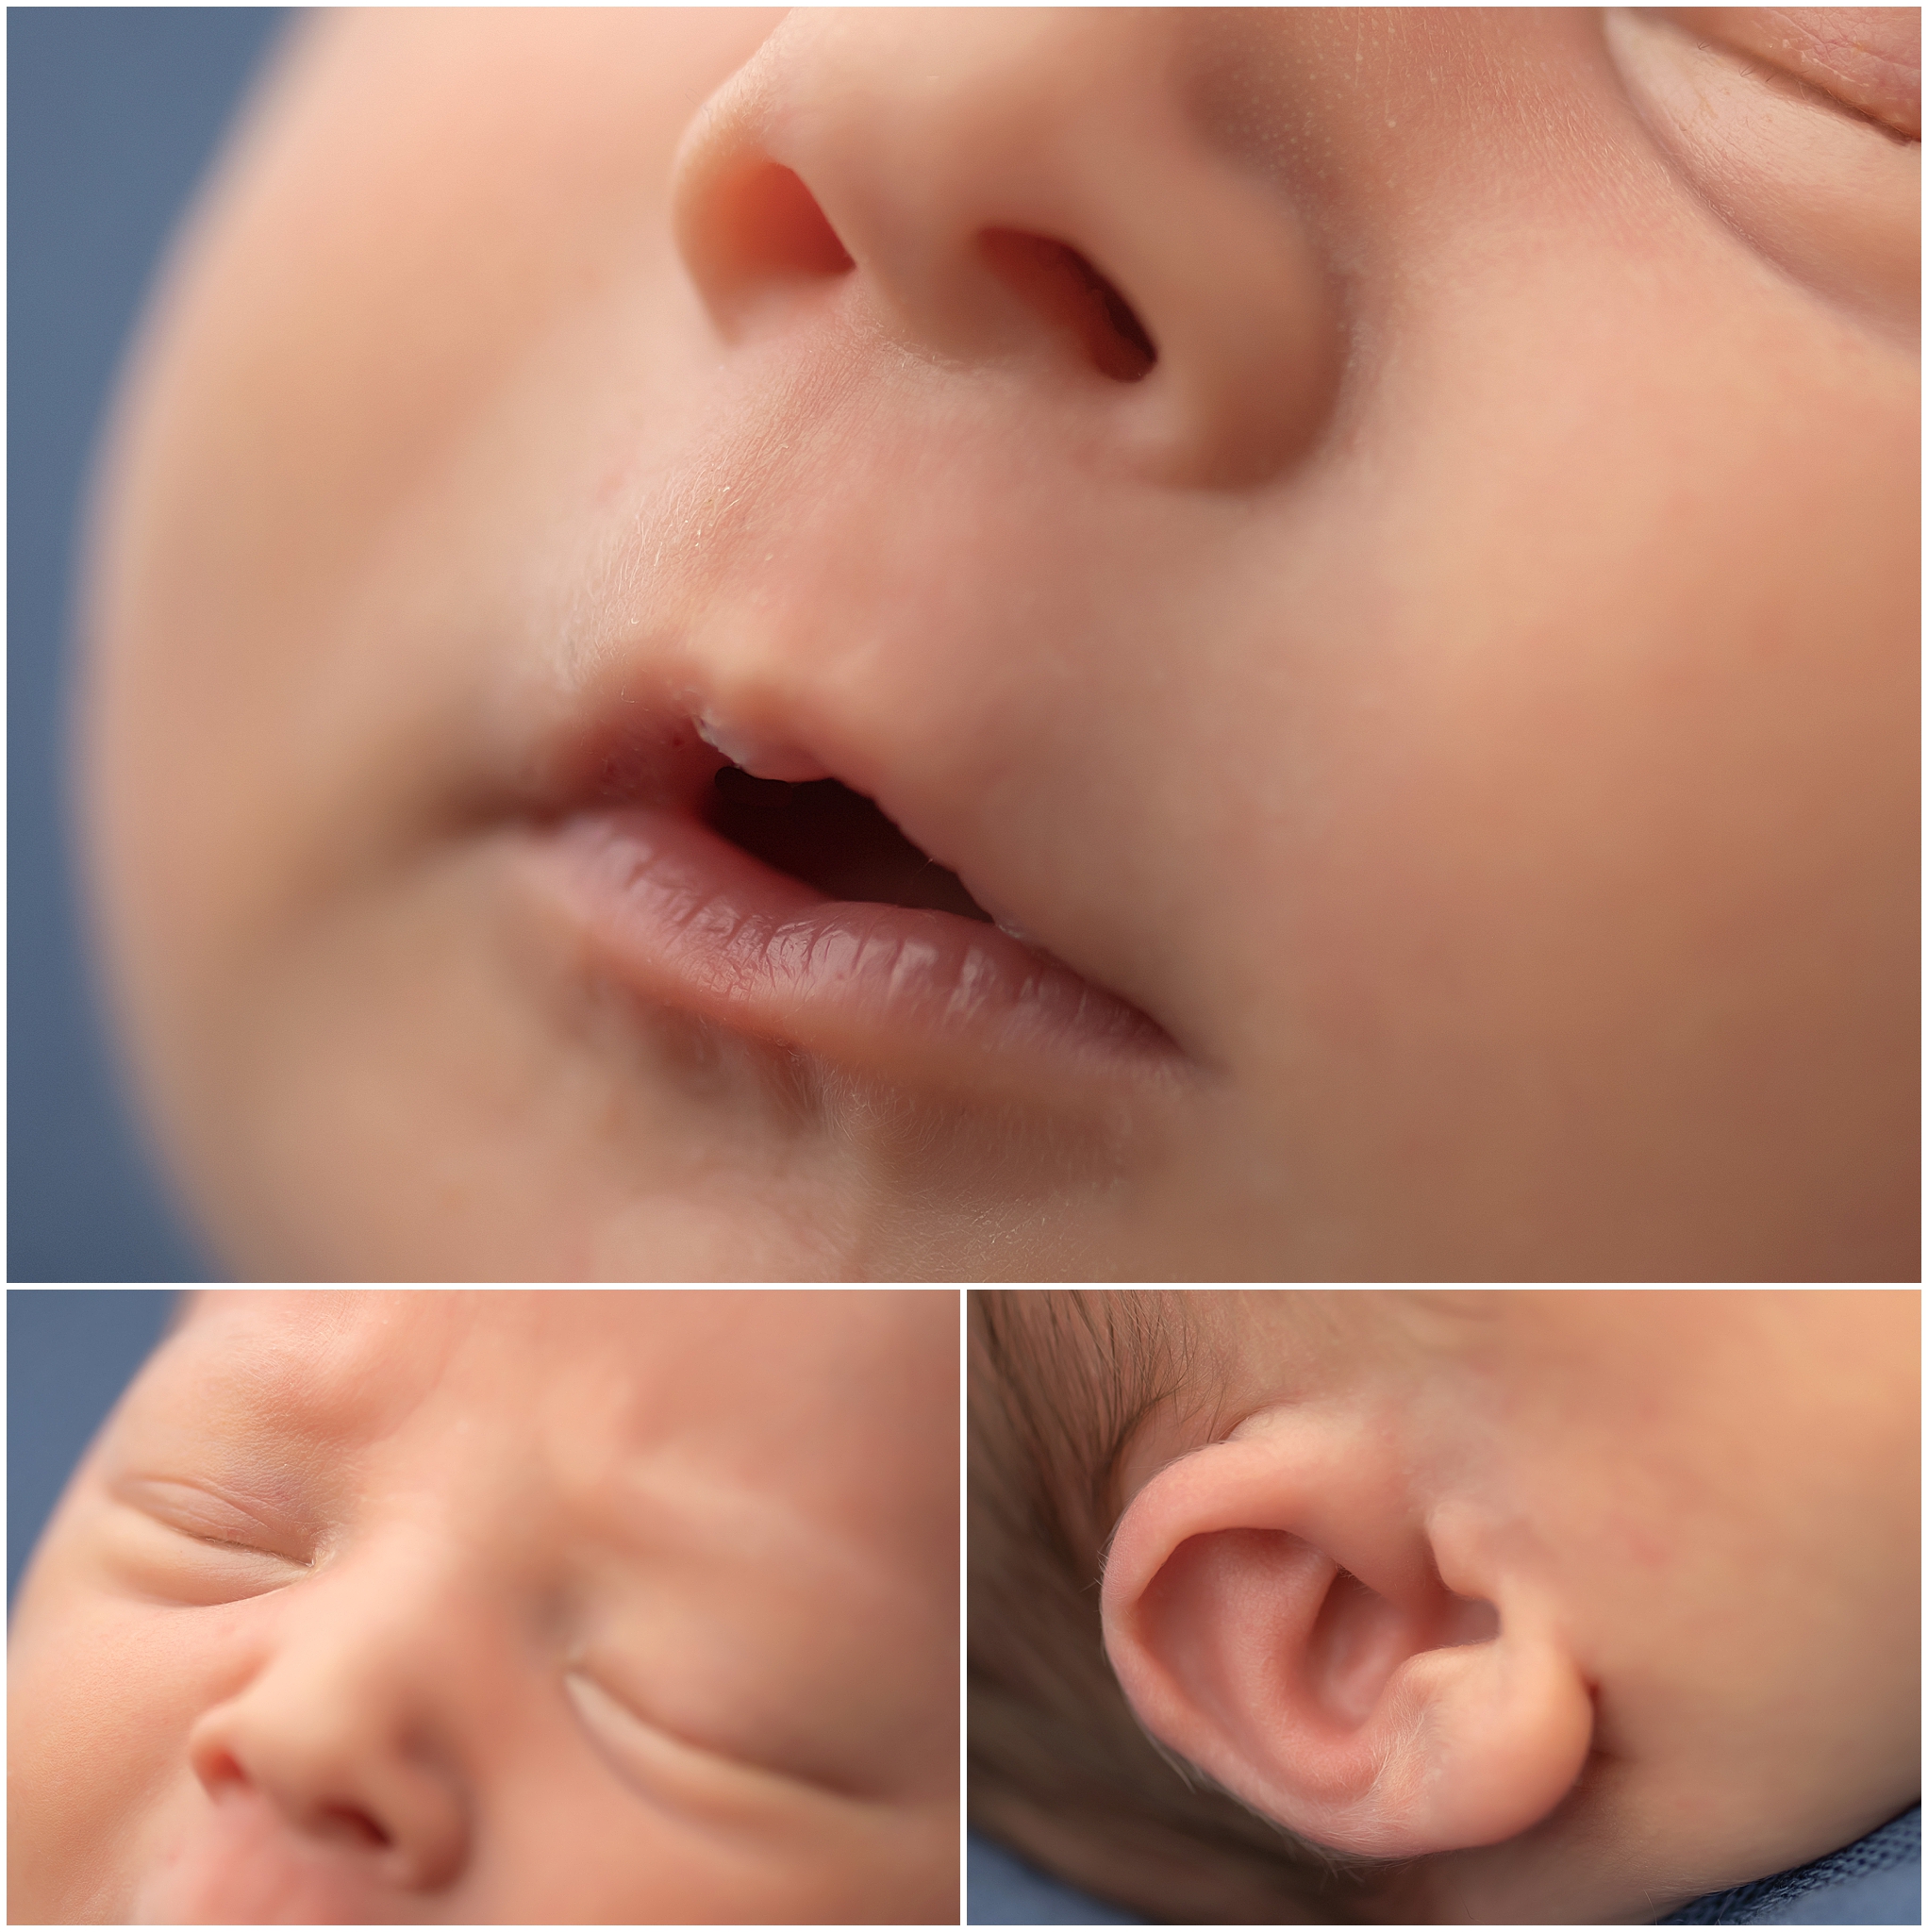 detail images of newborn baby in london ontario